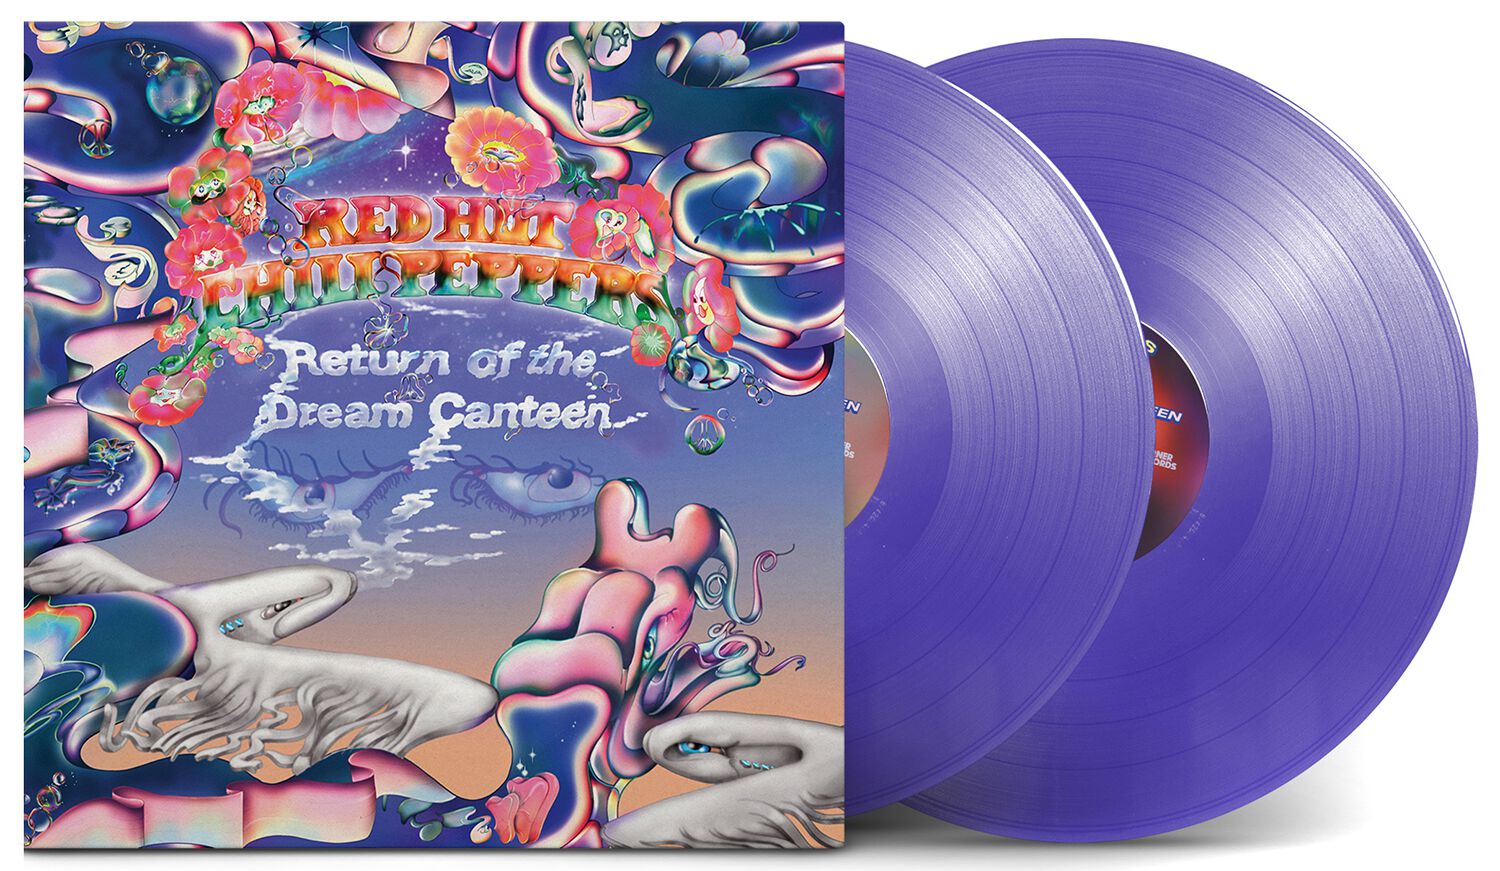 Return of the dream canteen | Red Hot Chili Peppers LP | EMP